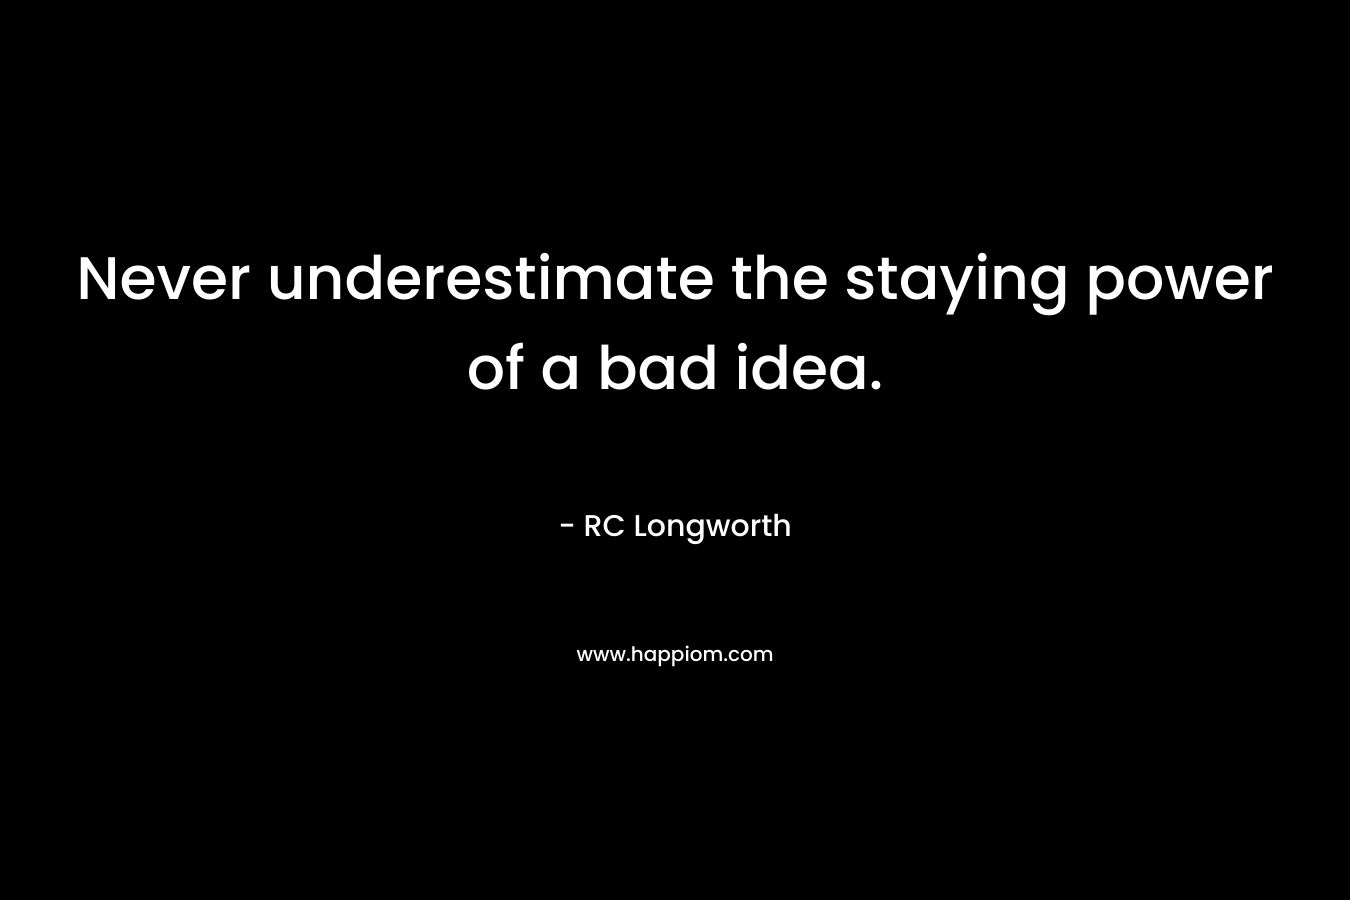 Never underestimate the staying power of a bad idea. – RC Longworth